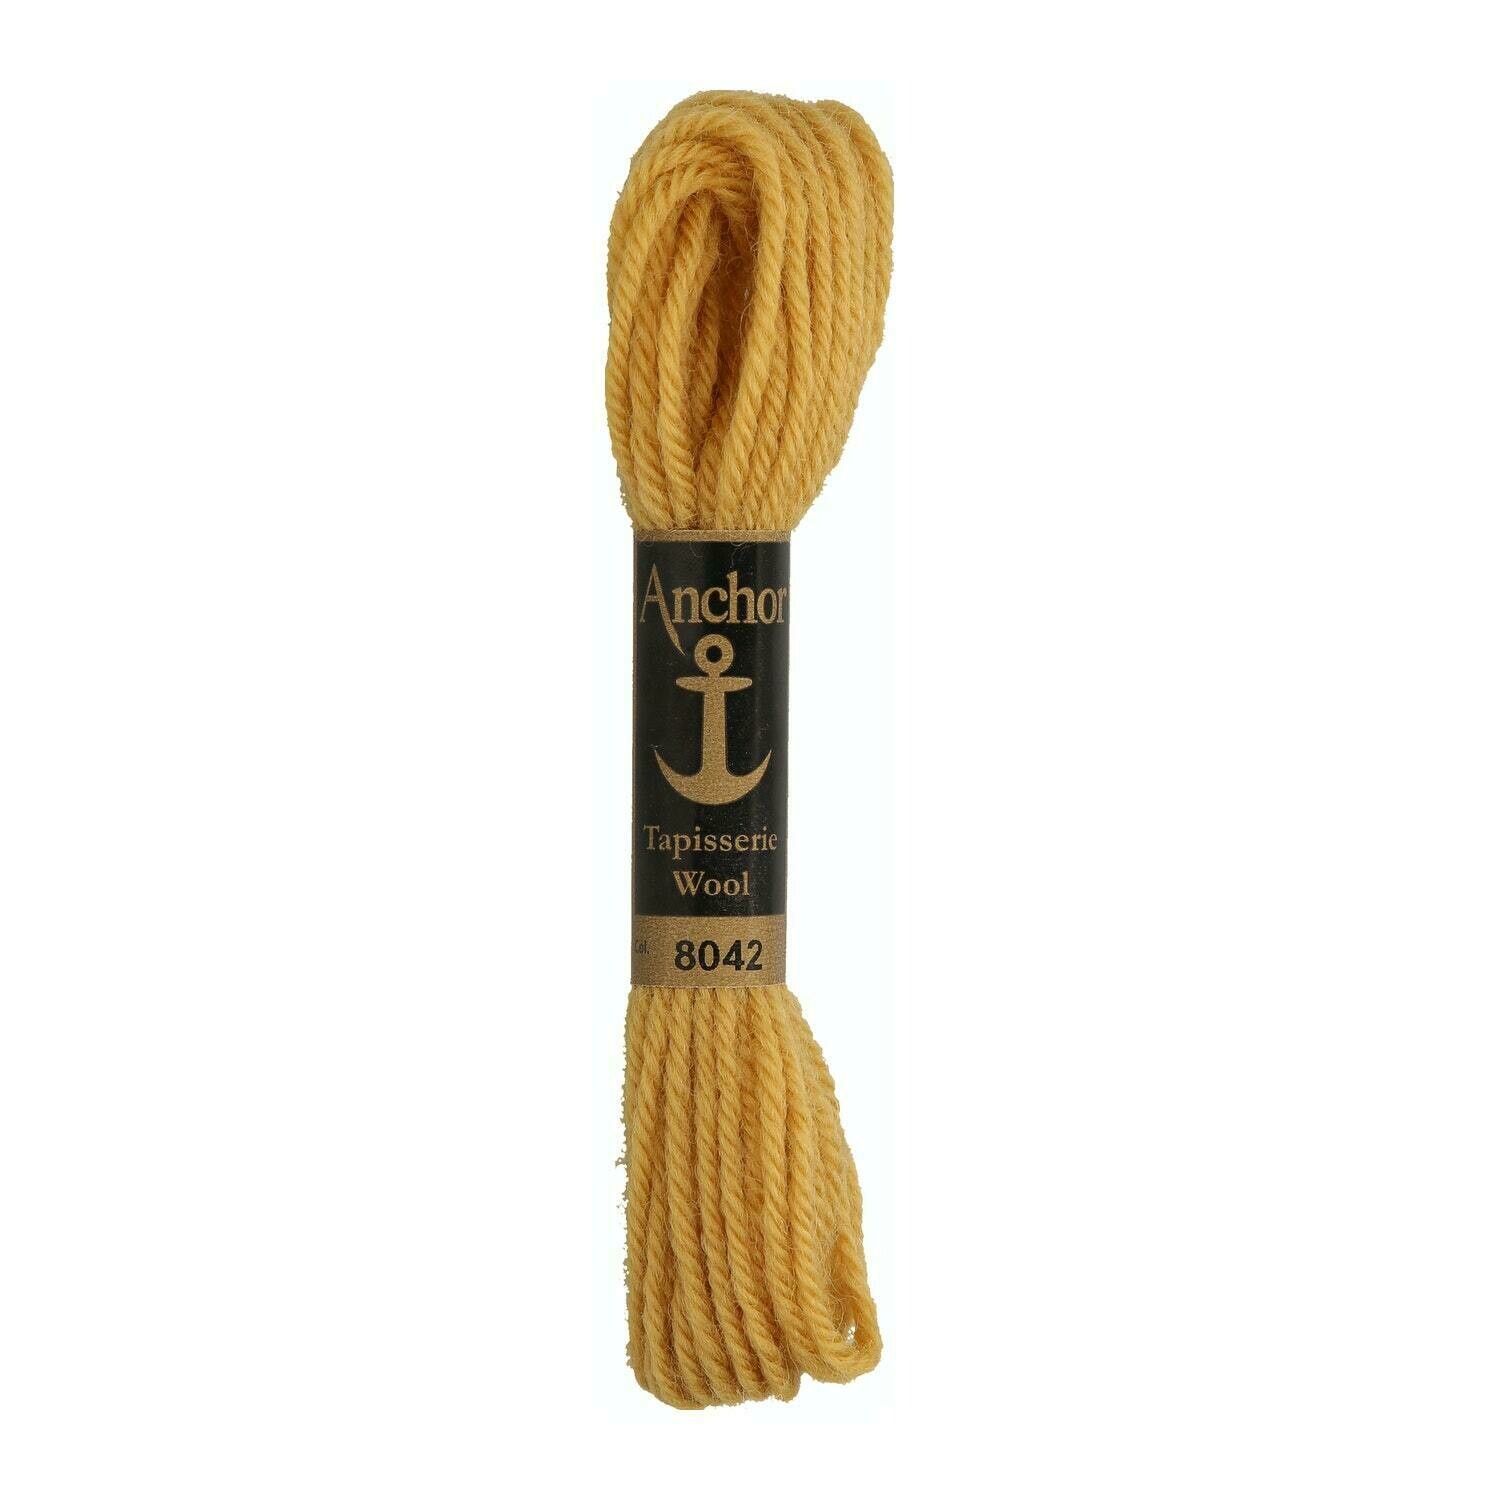 Anchor Tapisserie Wool #08042